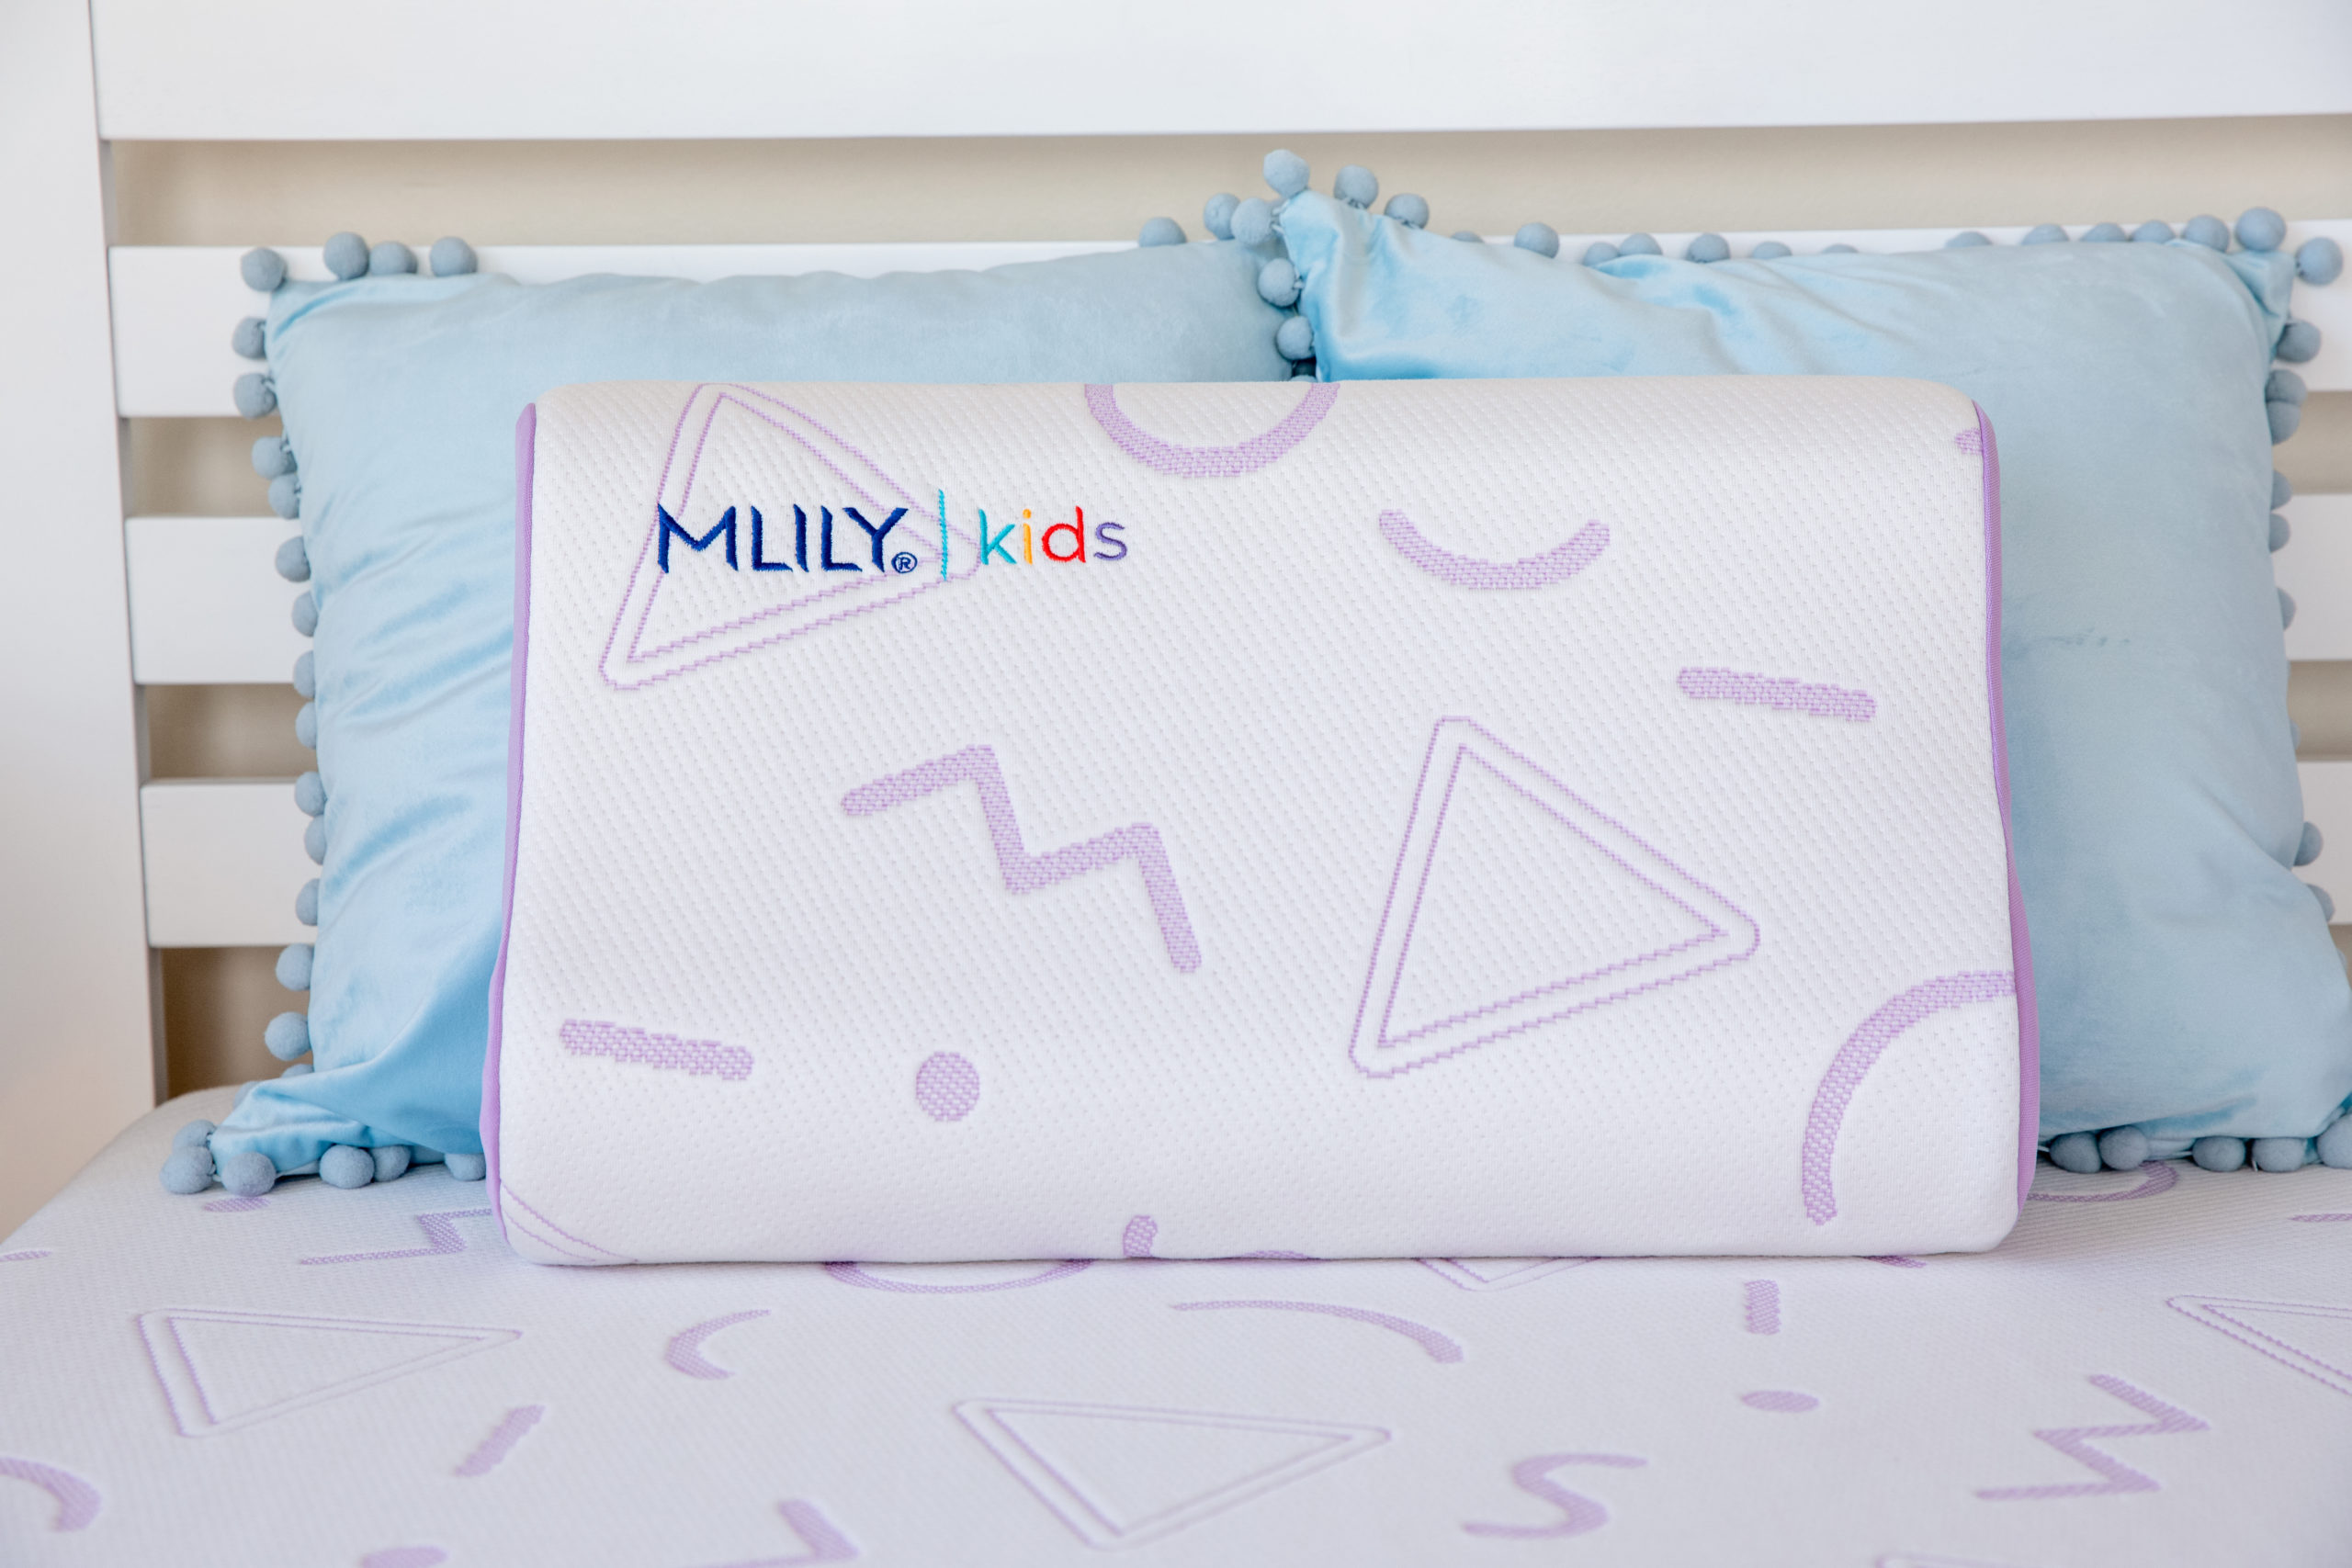 A white Jama pillow with purple accent designs labeled MLILY kids sits on a twin bed in front of two light blue throw pillows with pompom accents.